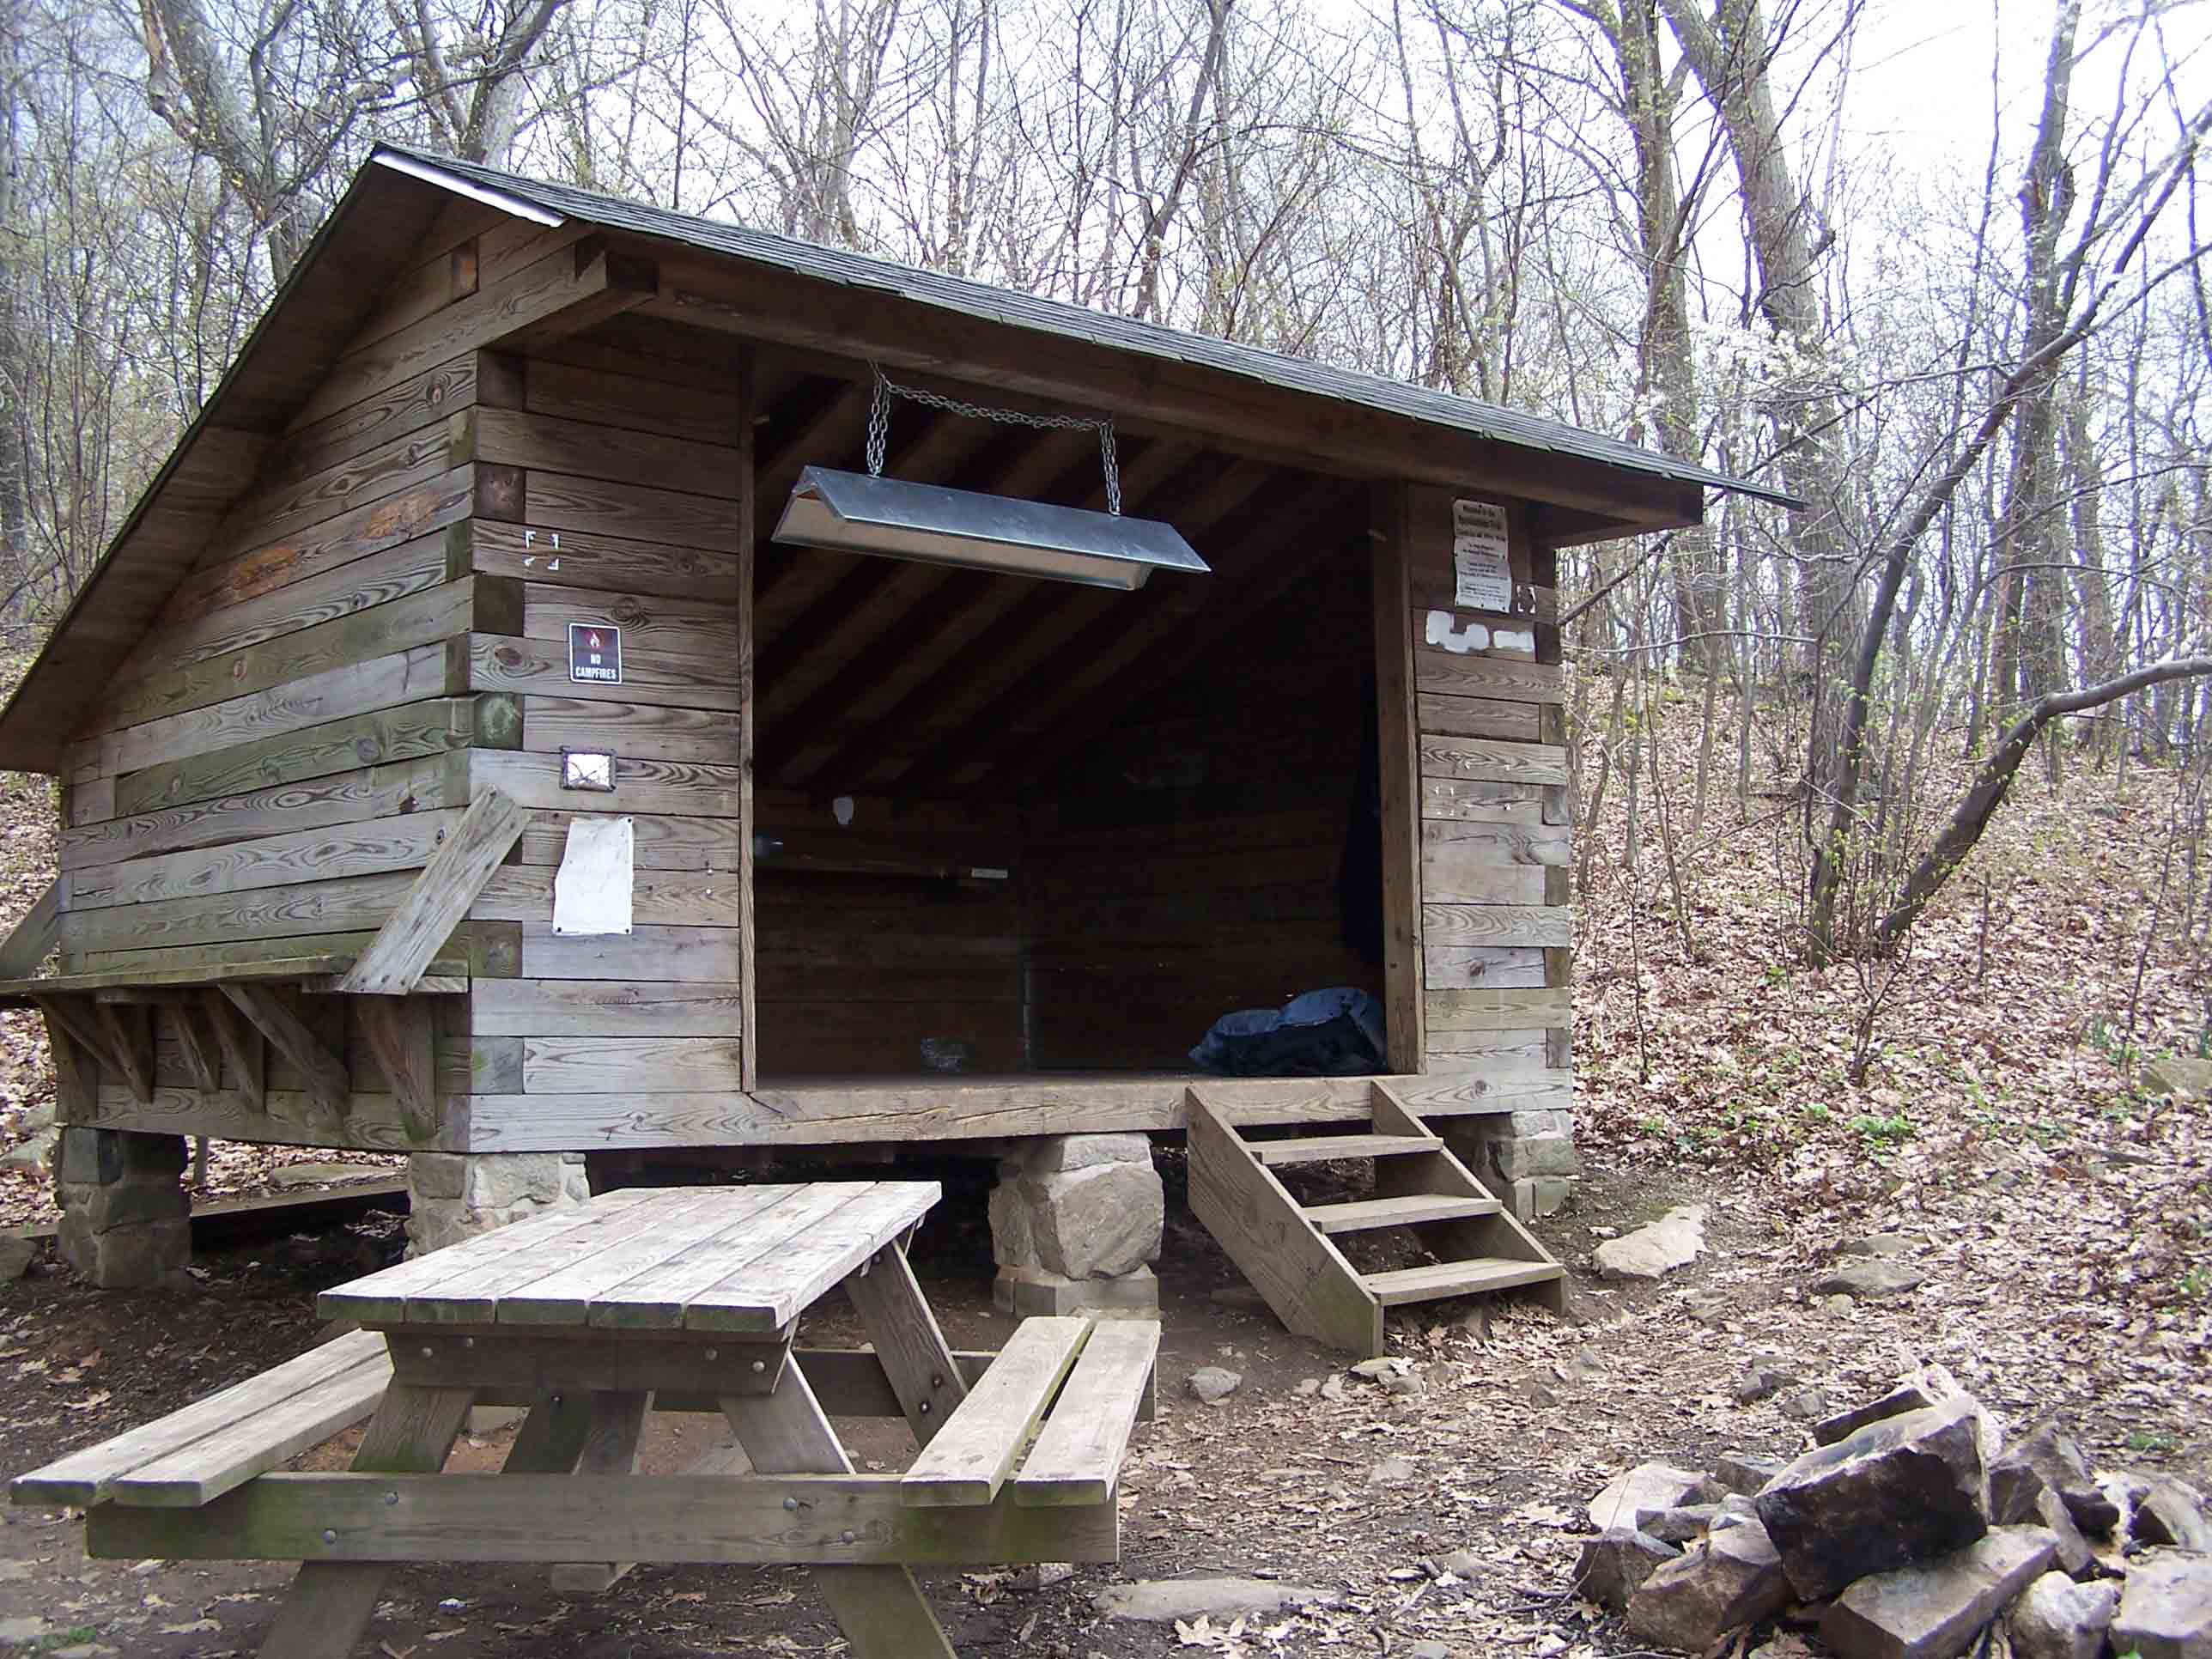 mm 6.5 - Pochuck Mountain shelter which is 0.1 mile from the AT - 4/29/07. Courtesy at@rohland.org